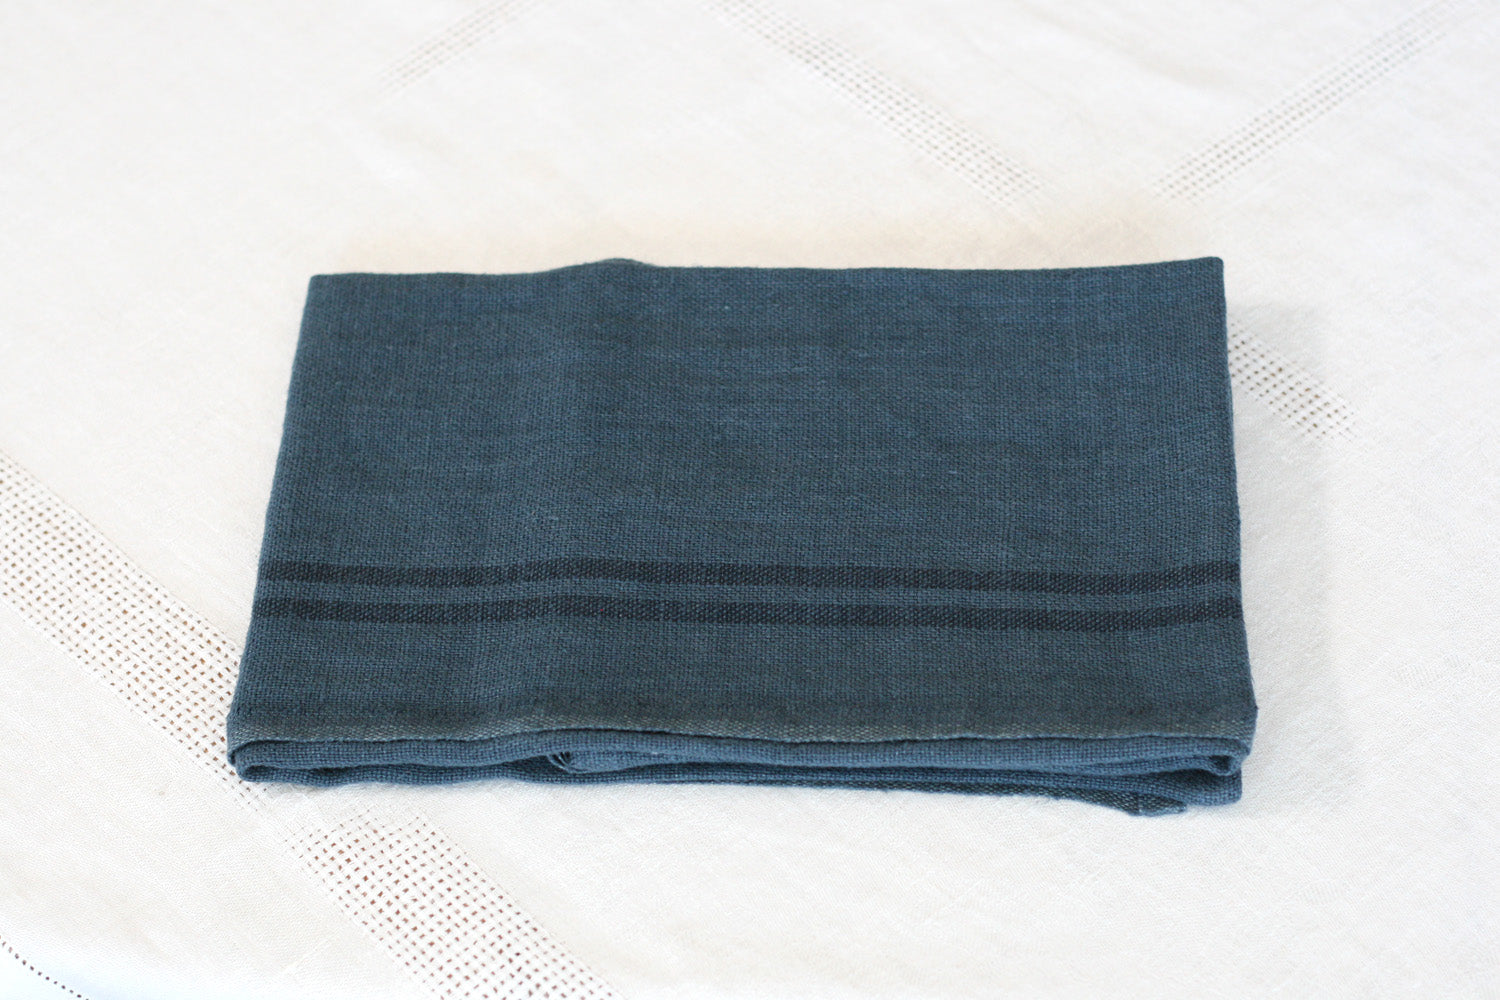 Charvet Editions Striped Linen Dish Towel. Made in France.